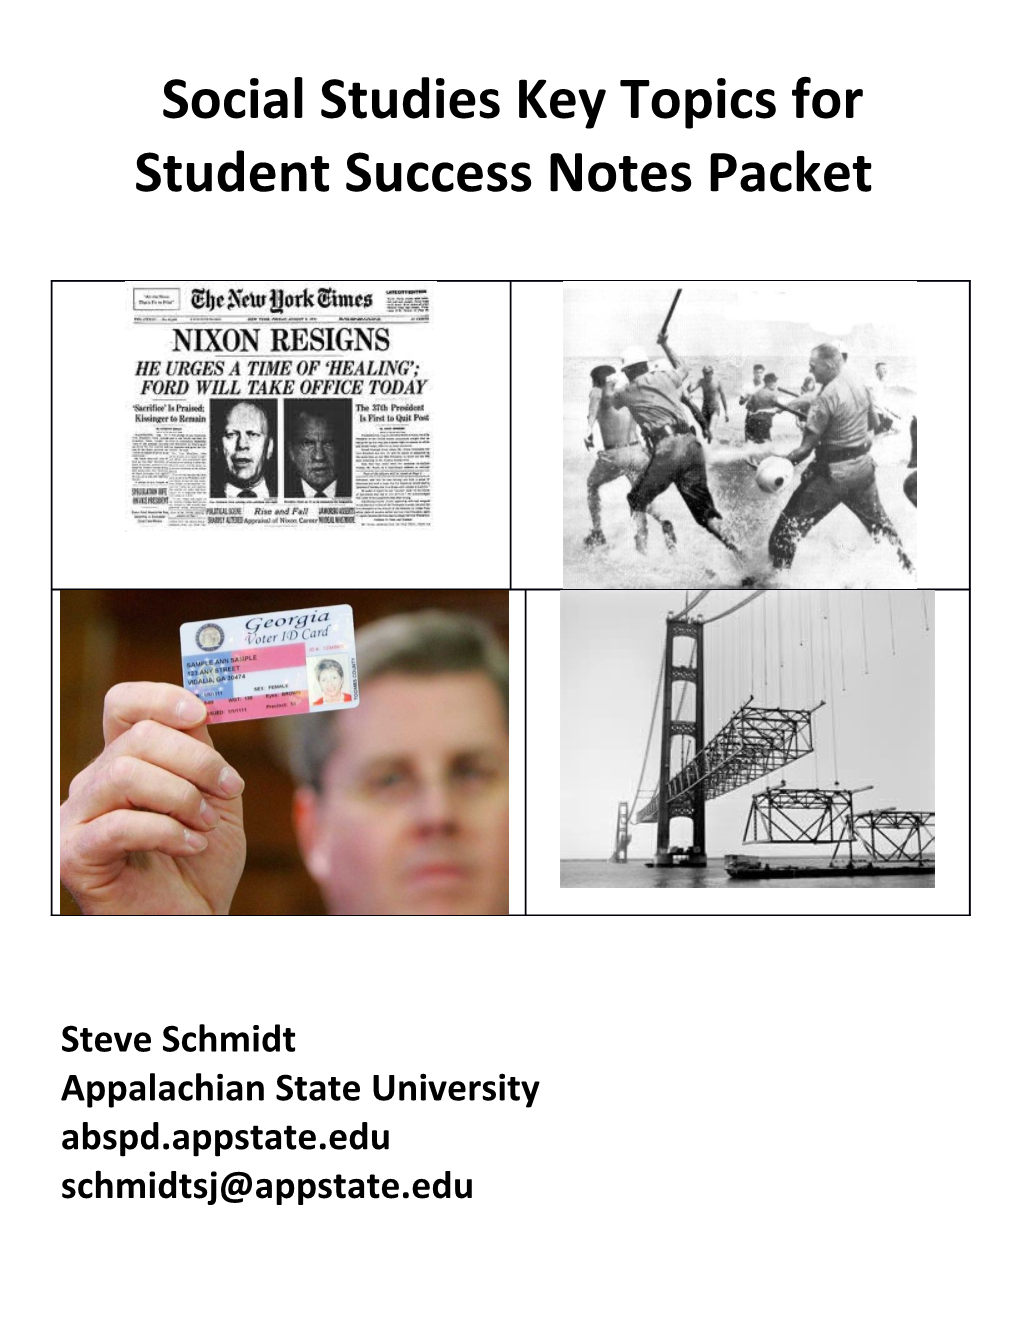 Social Studies Key Topics for Student Success Notes Packet